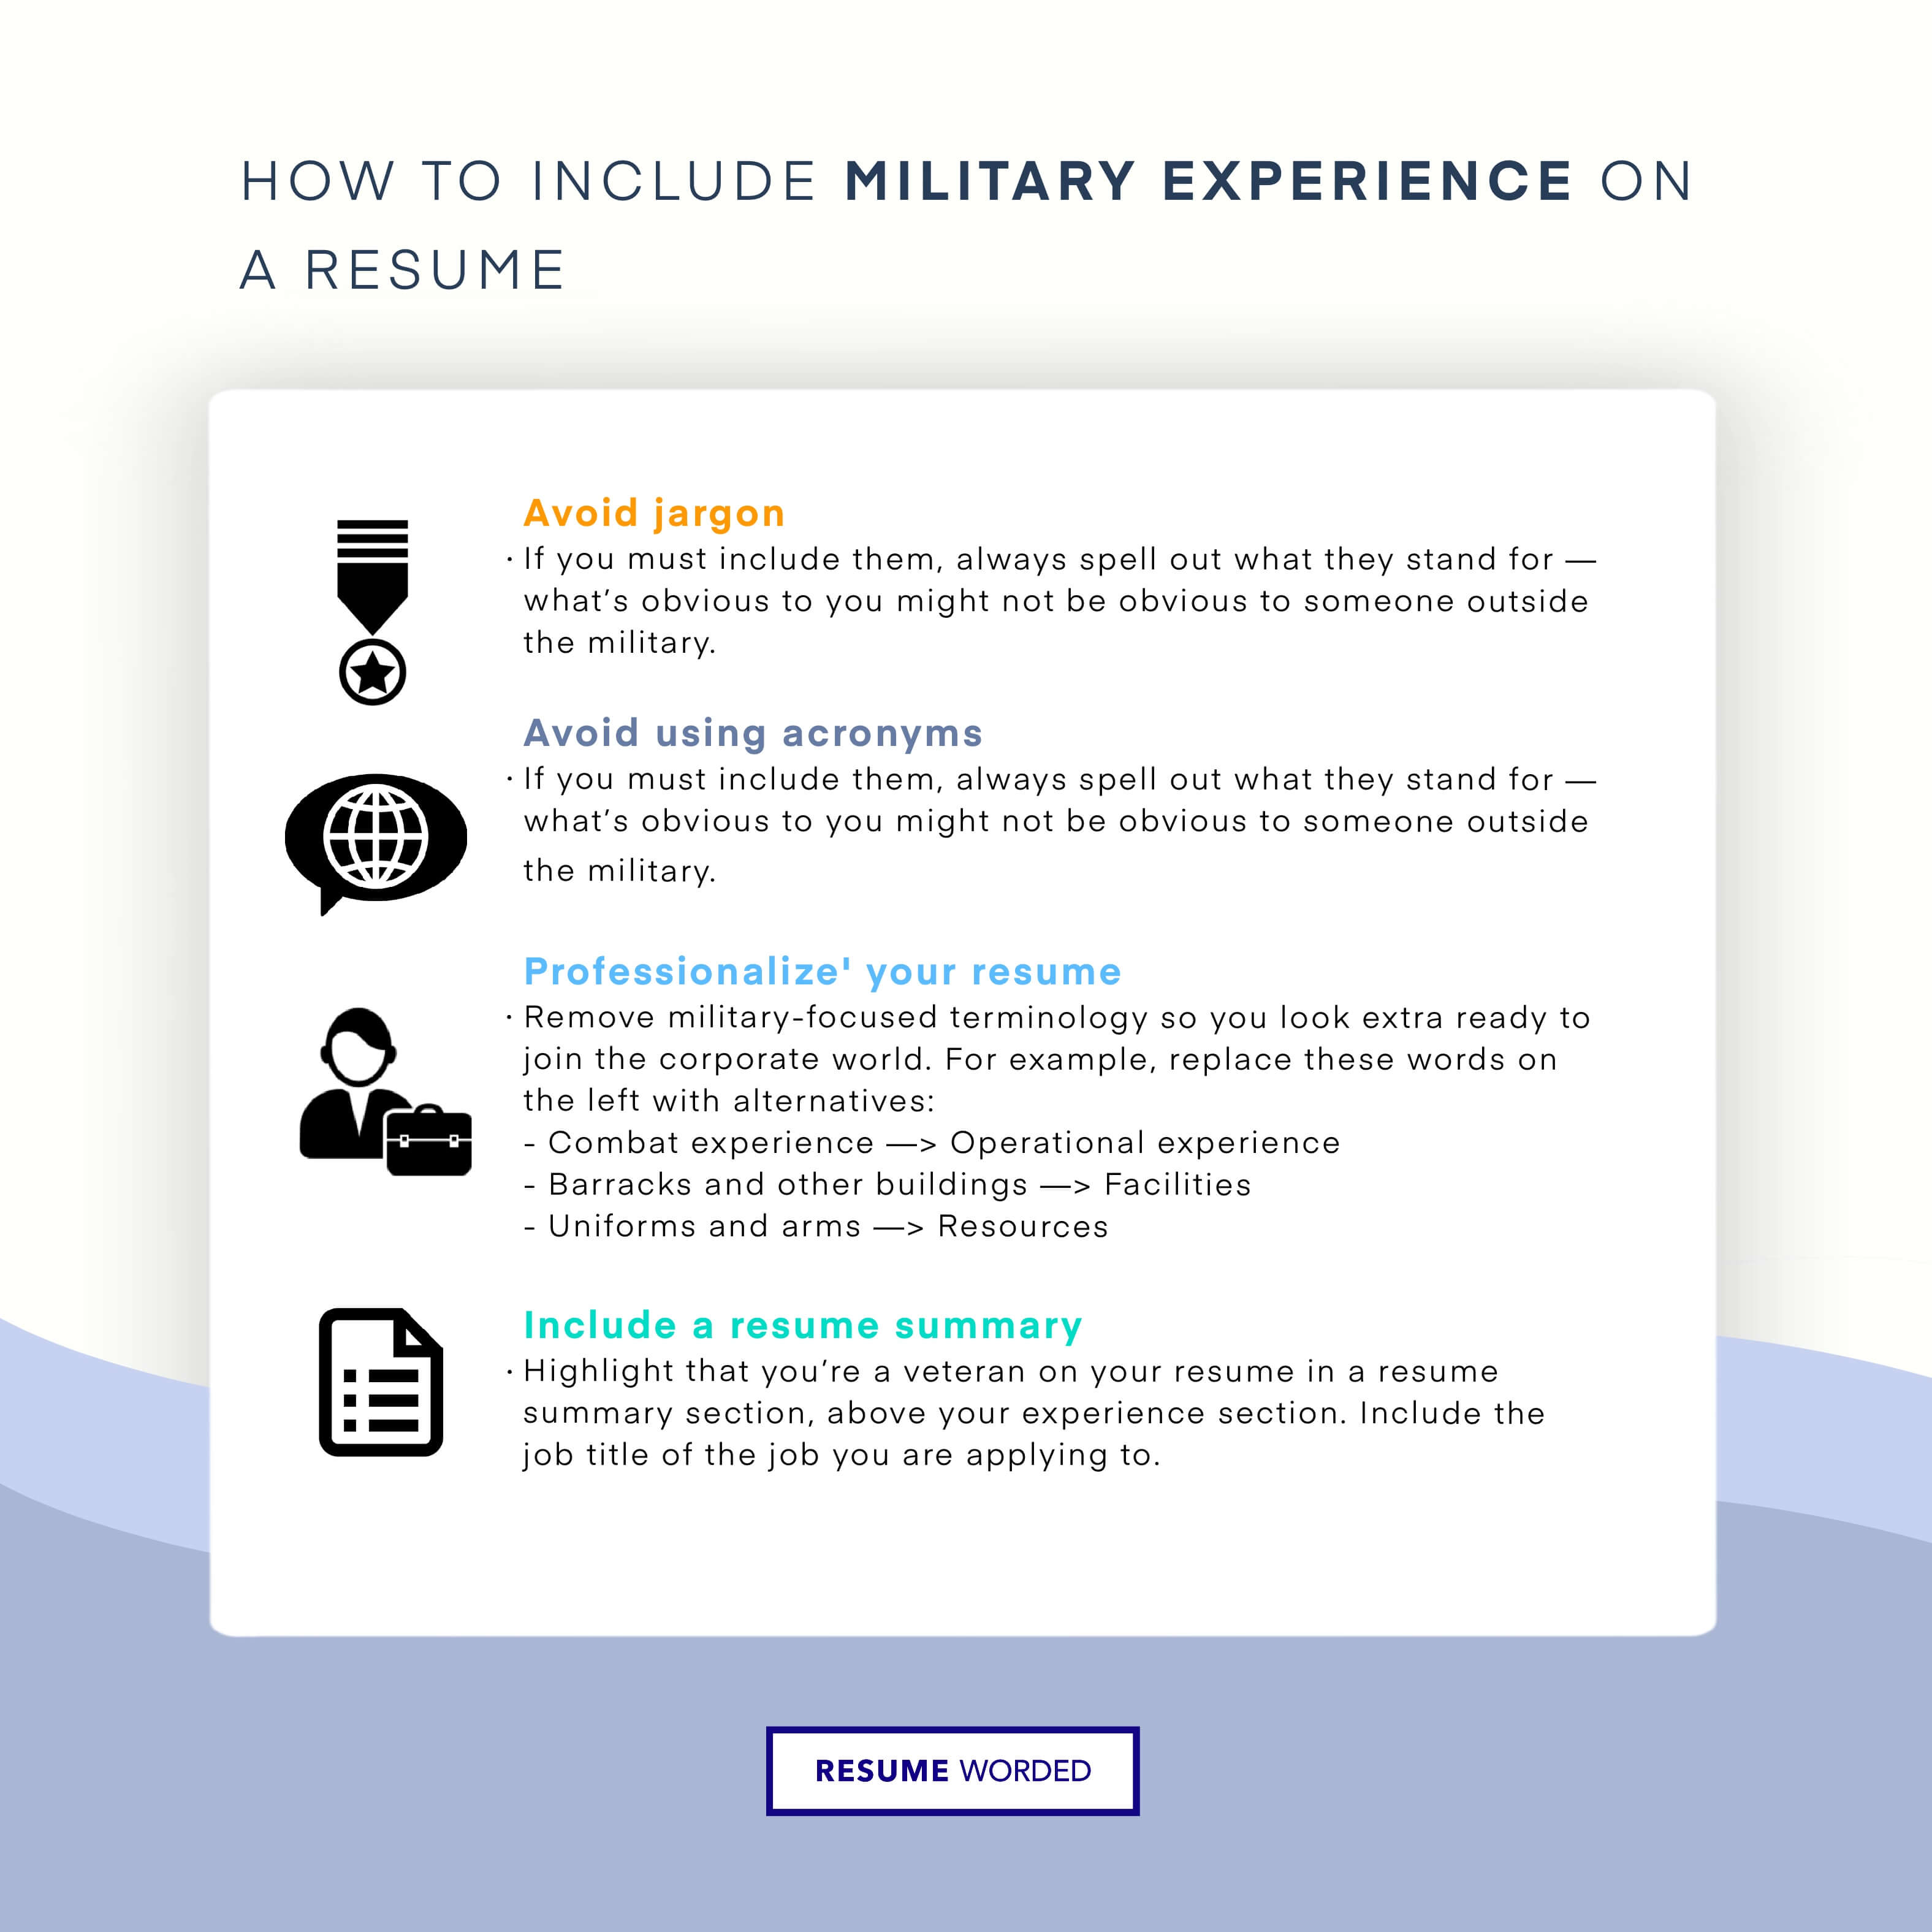 Infographic showing how to list military experience on your resume